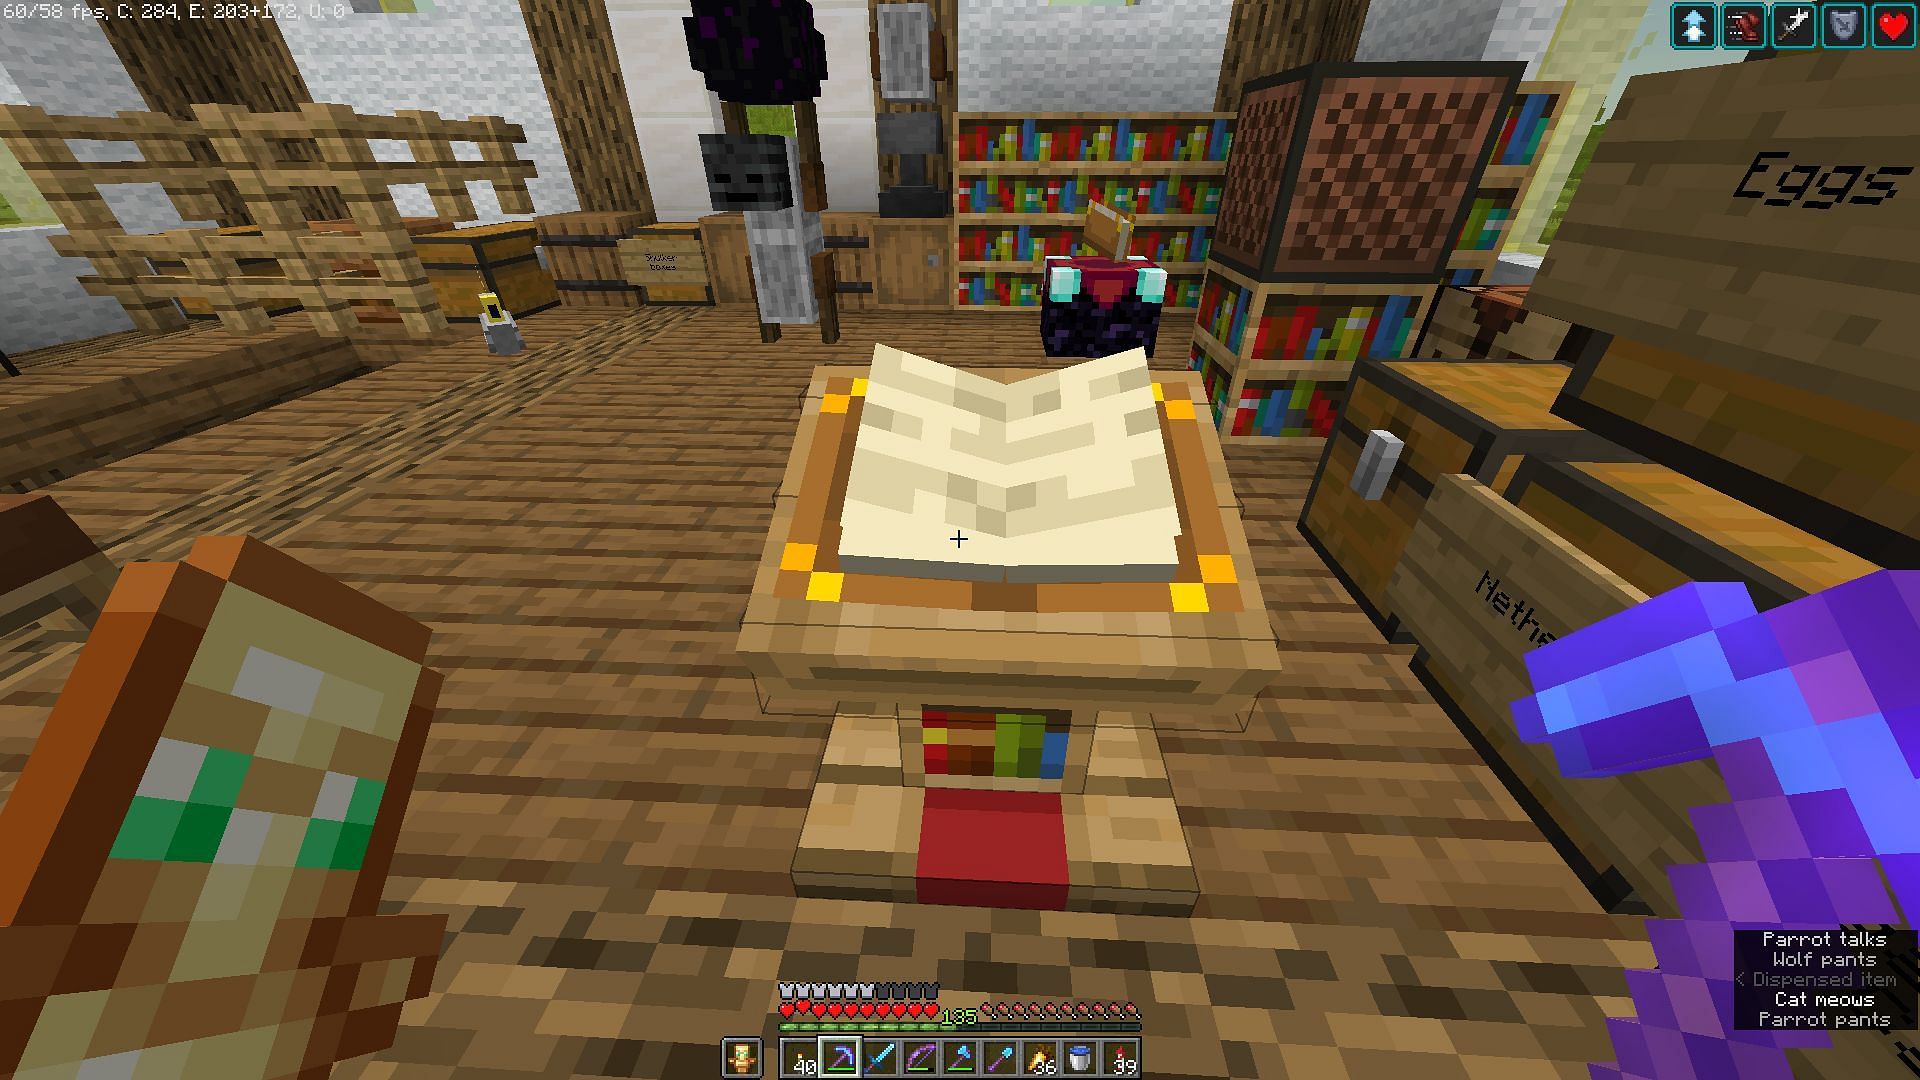 Book and quill on lecturn (Image via Mojang)